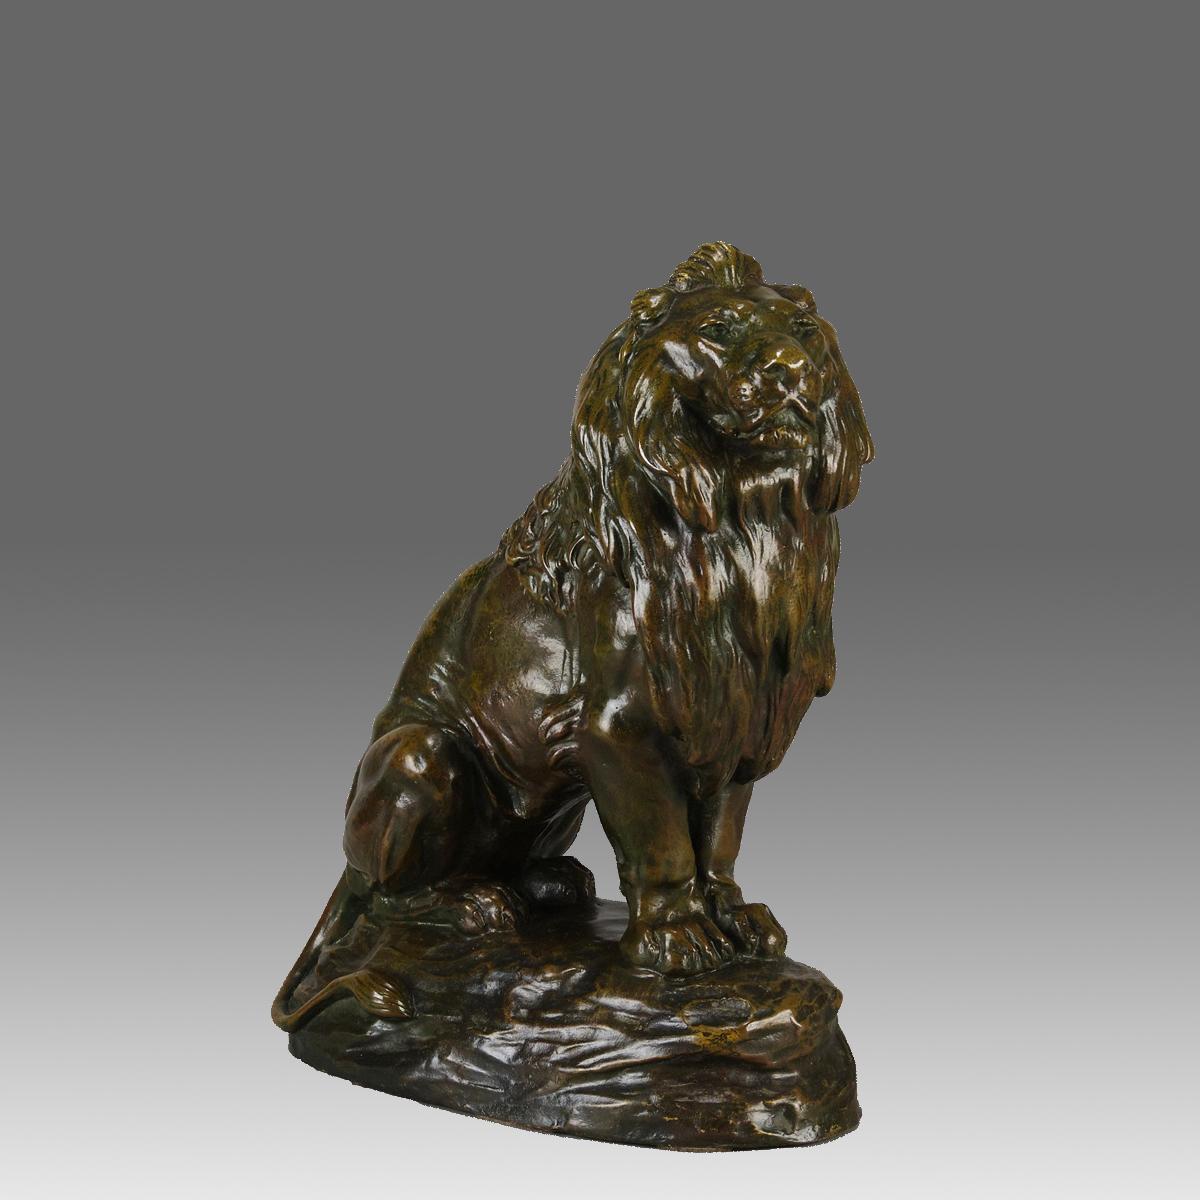 A majestic early 20th Century French Animalier bronze study of a proud seated lion with excellent rich green and autumnal patination and very fine hand chased surface detail.  Signed C.Masson, stamped and inscribed Susse Freres.

ADDITIONAL